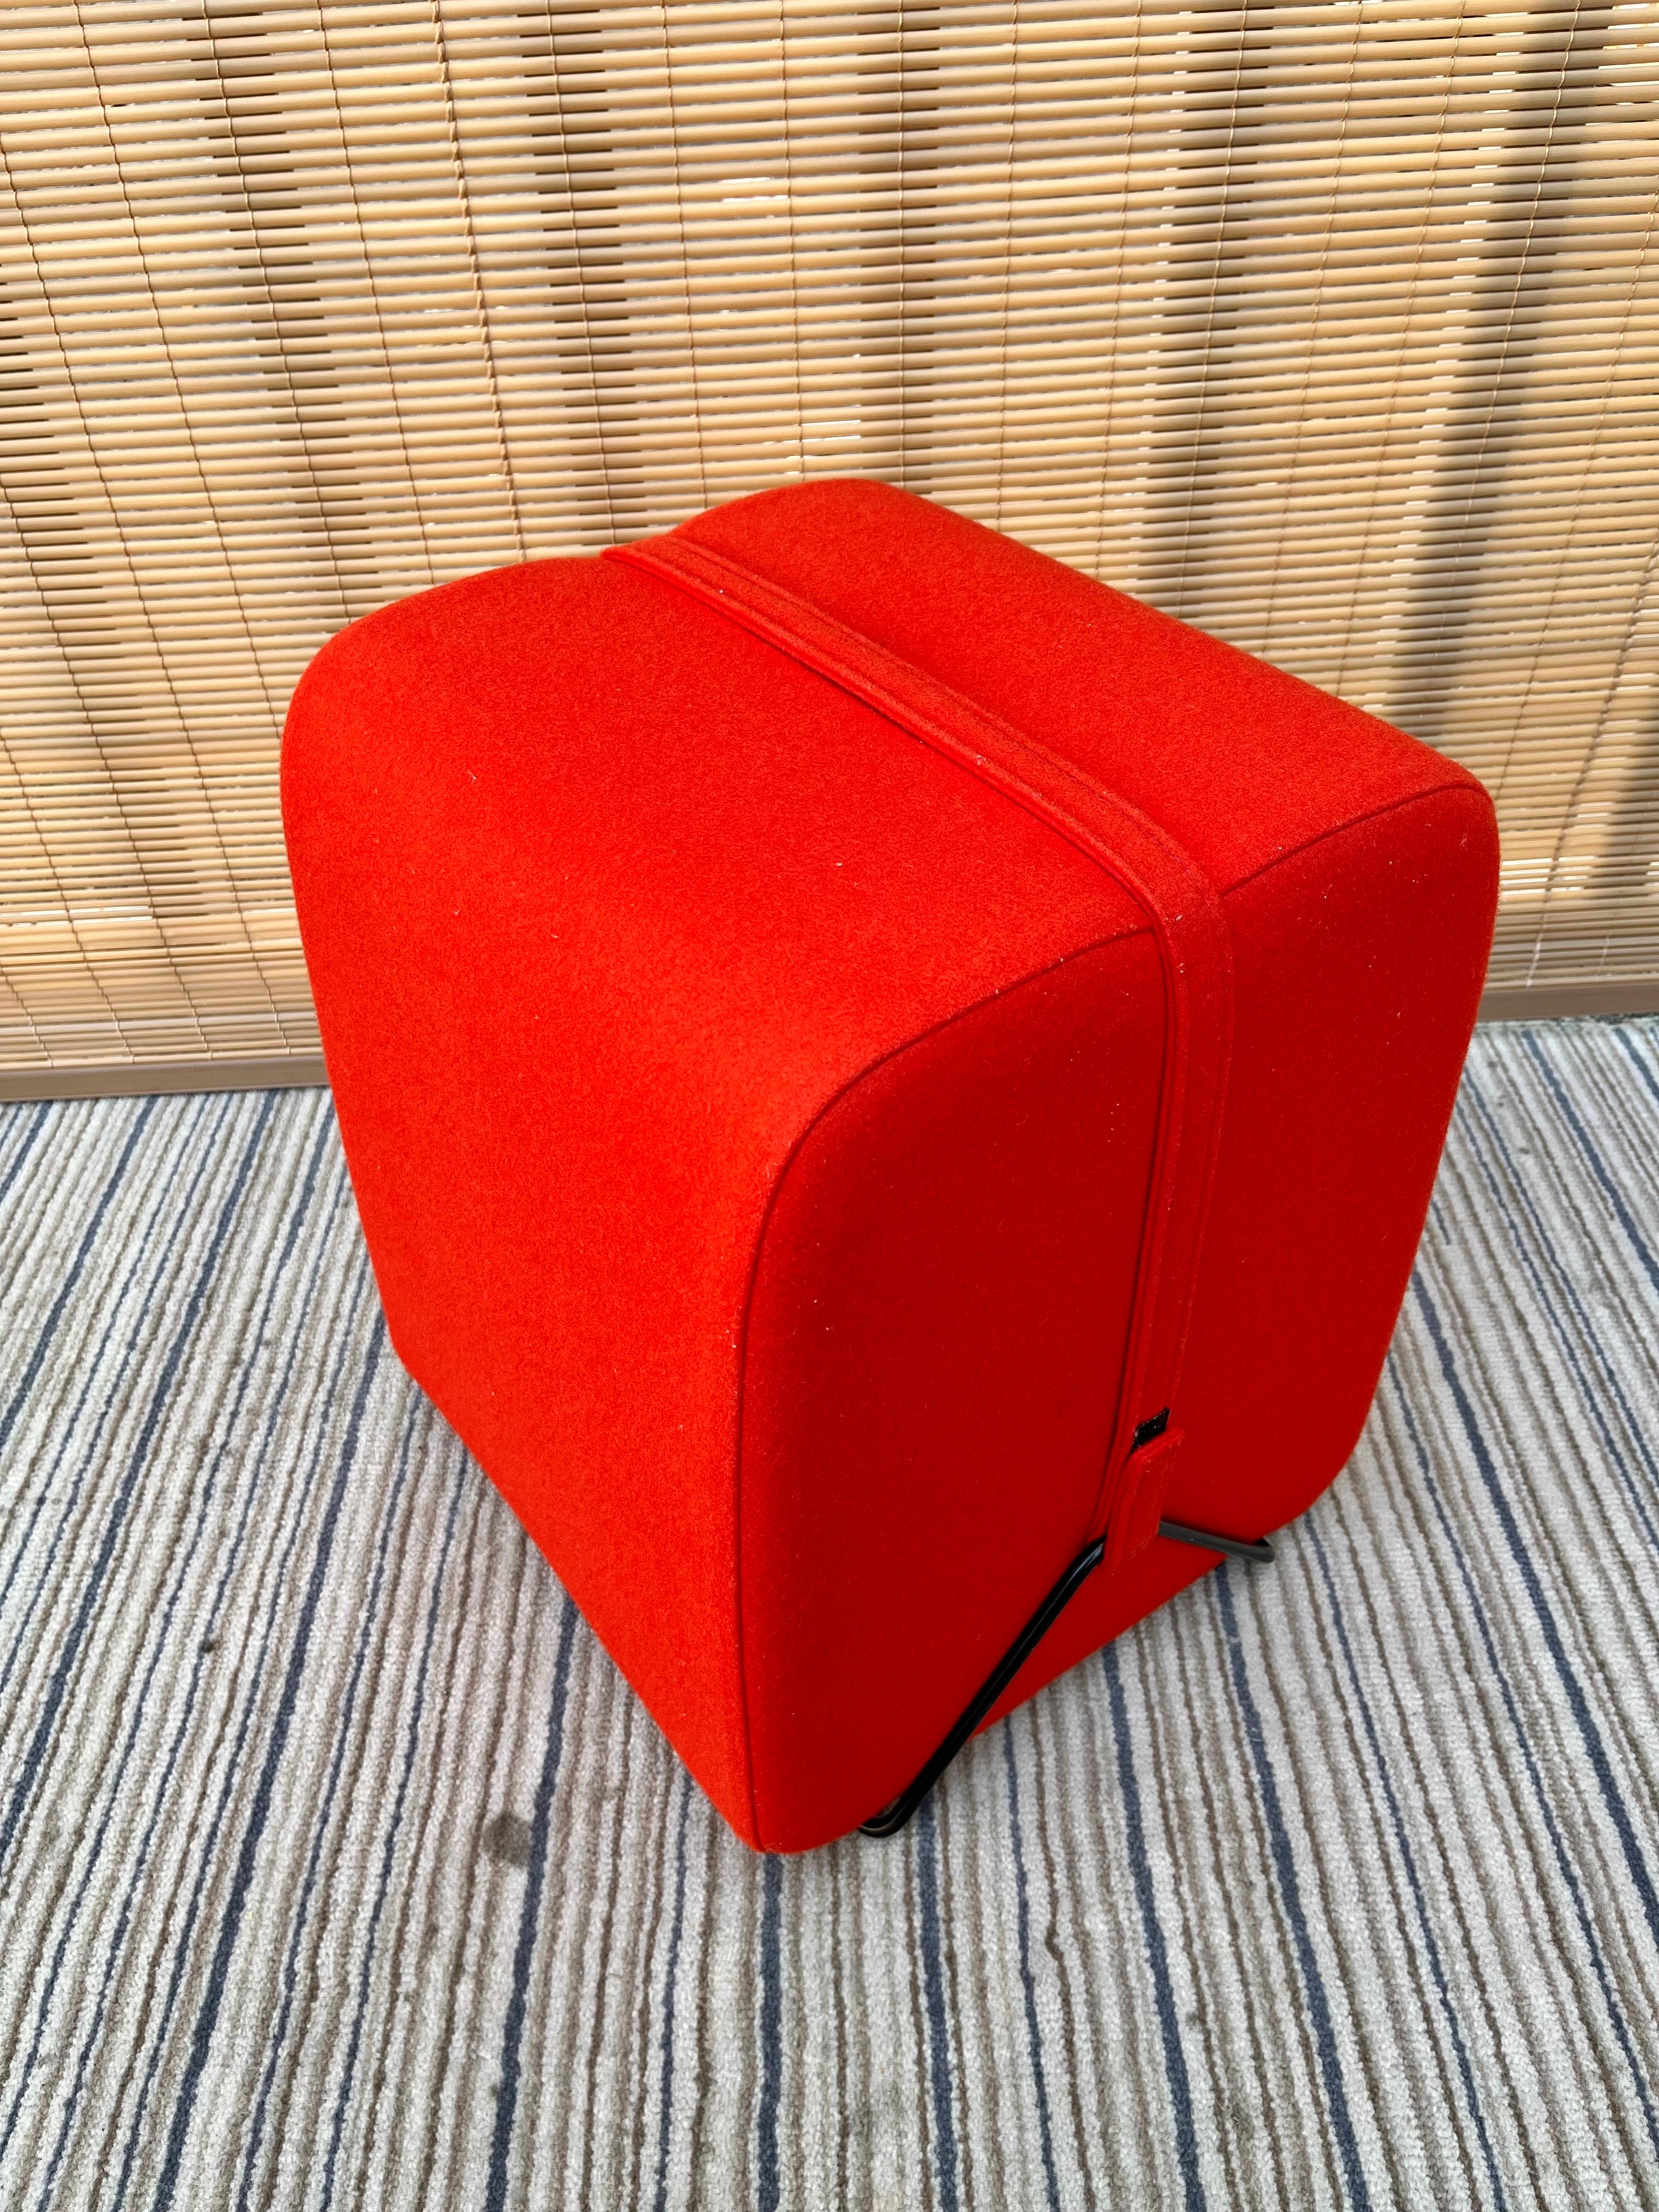 French Contemporary Mobidec Footstool by Pierre Charpin for Ligne Roset